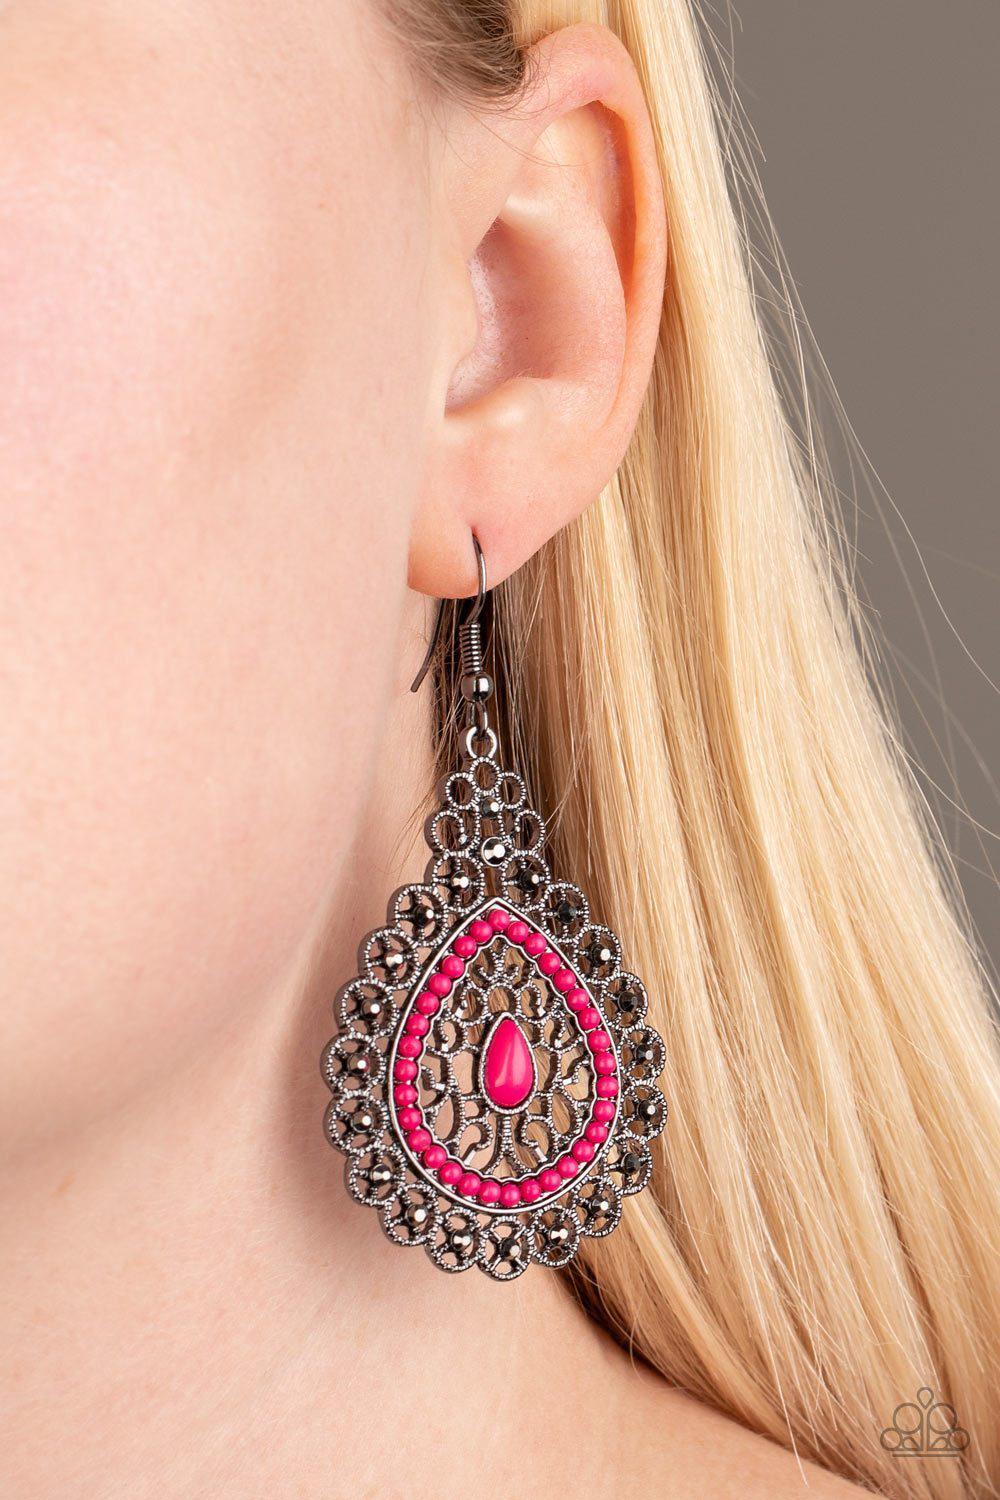 Carnival Courtesan Pink and Gunmetal Earrings - Paparazzi Accessories - lightbox -CarasShop.com - $5 Jewelry by Cara Jewels